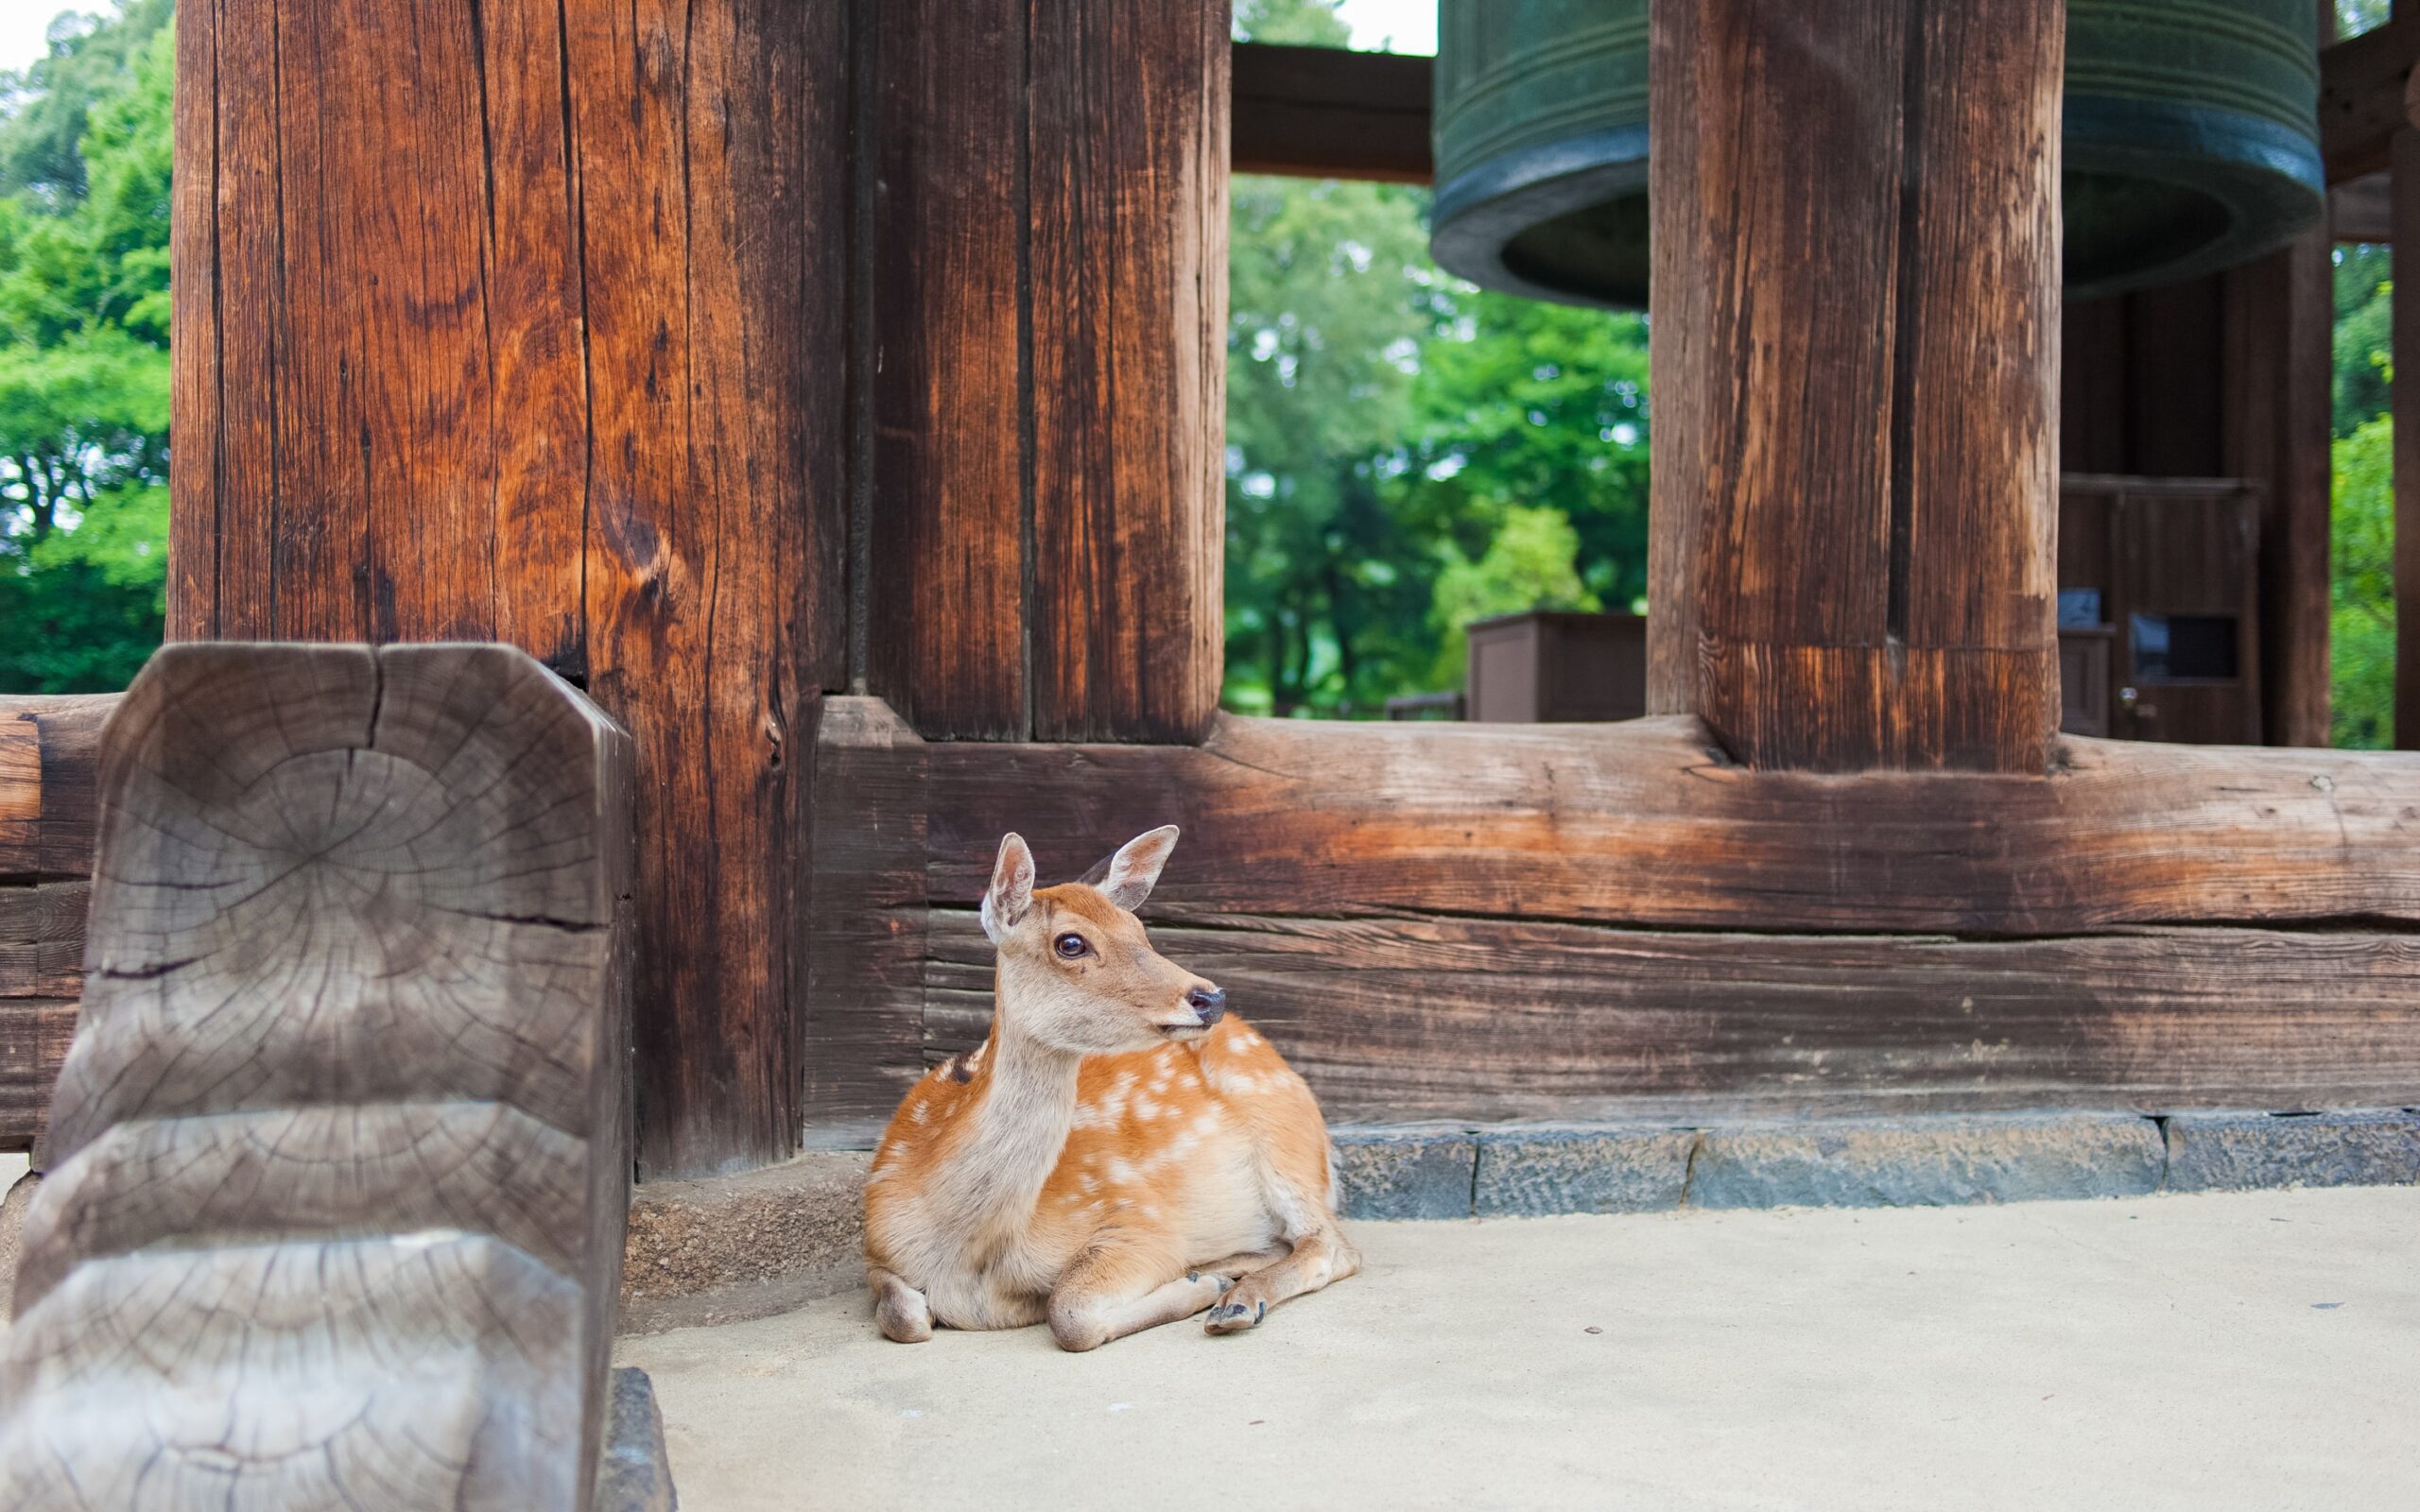 yux-xiang-young doe deer resting near Japanese temple bell house-unsplash